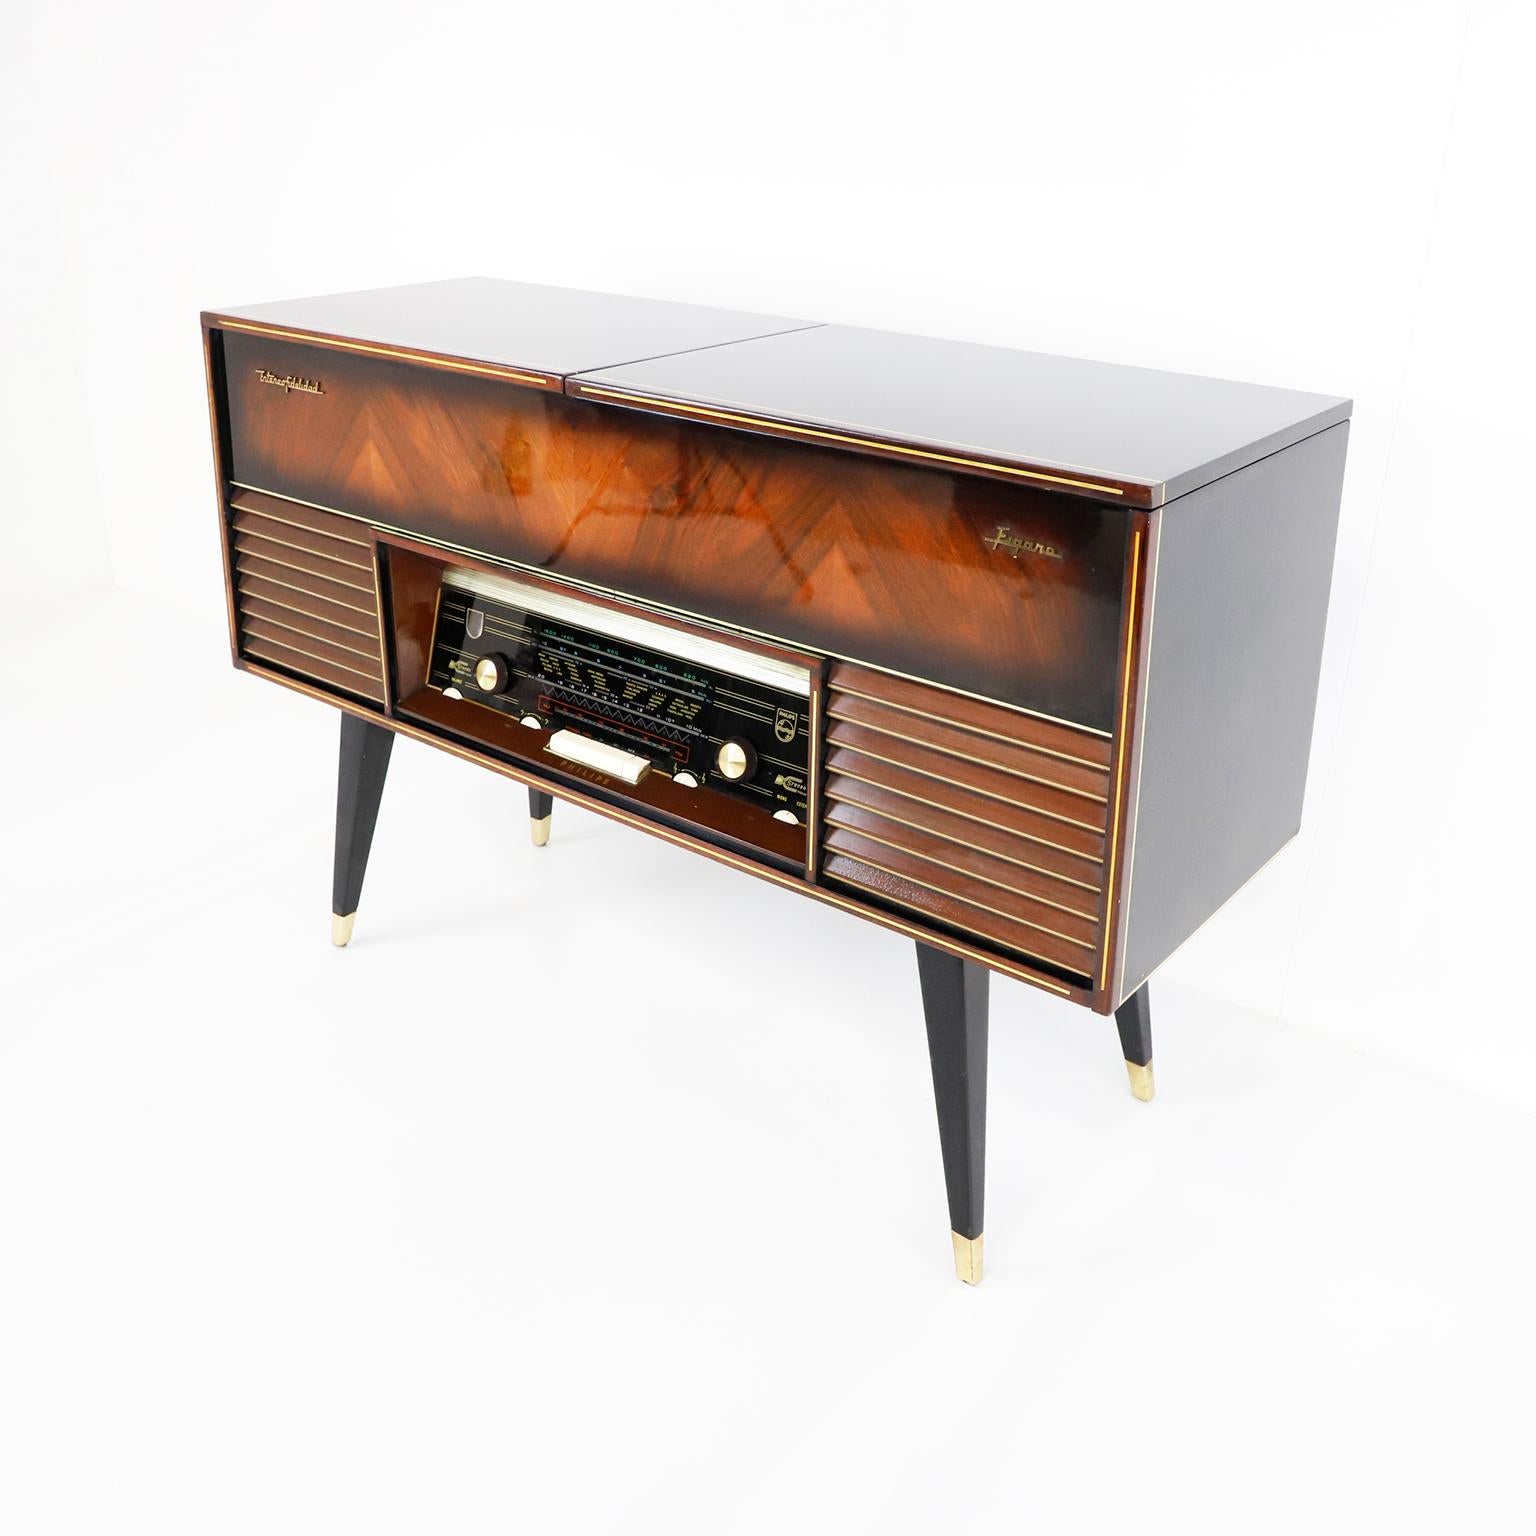 Circa 1960 by Philips. We offer this incredible de luxe turntable console that works with bulbs and made in fantastic root wood. The turntable work at perfection but the radio doesn't work. We can send you a video with the turntable working.
 